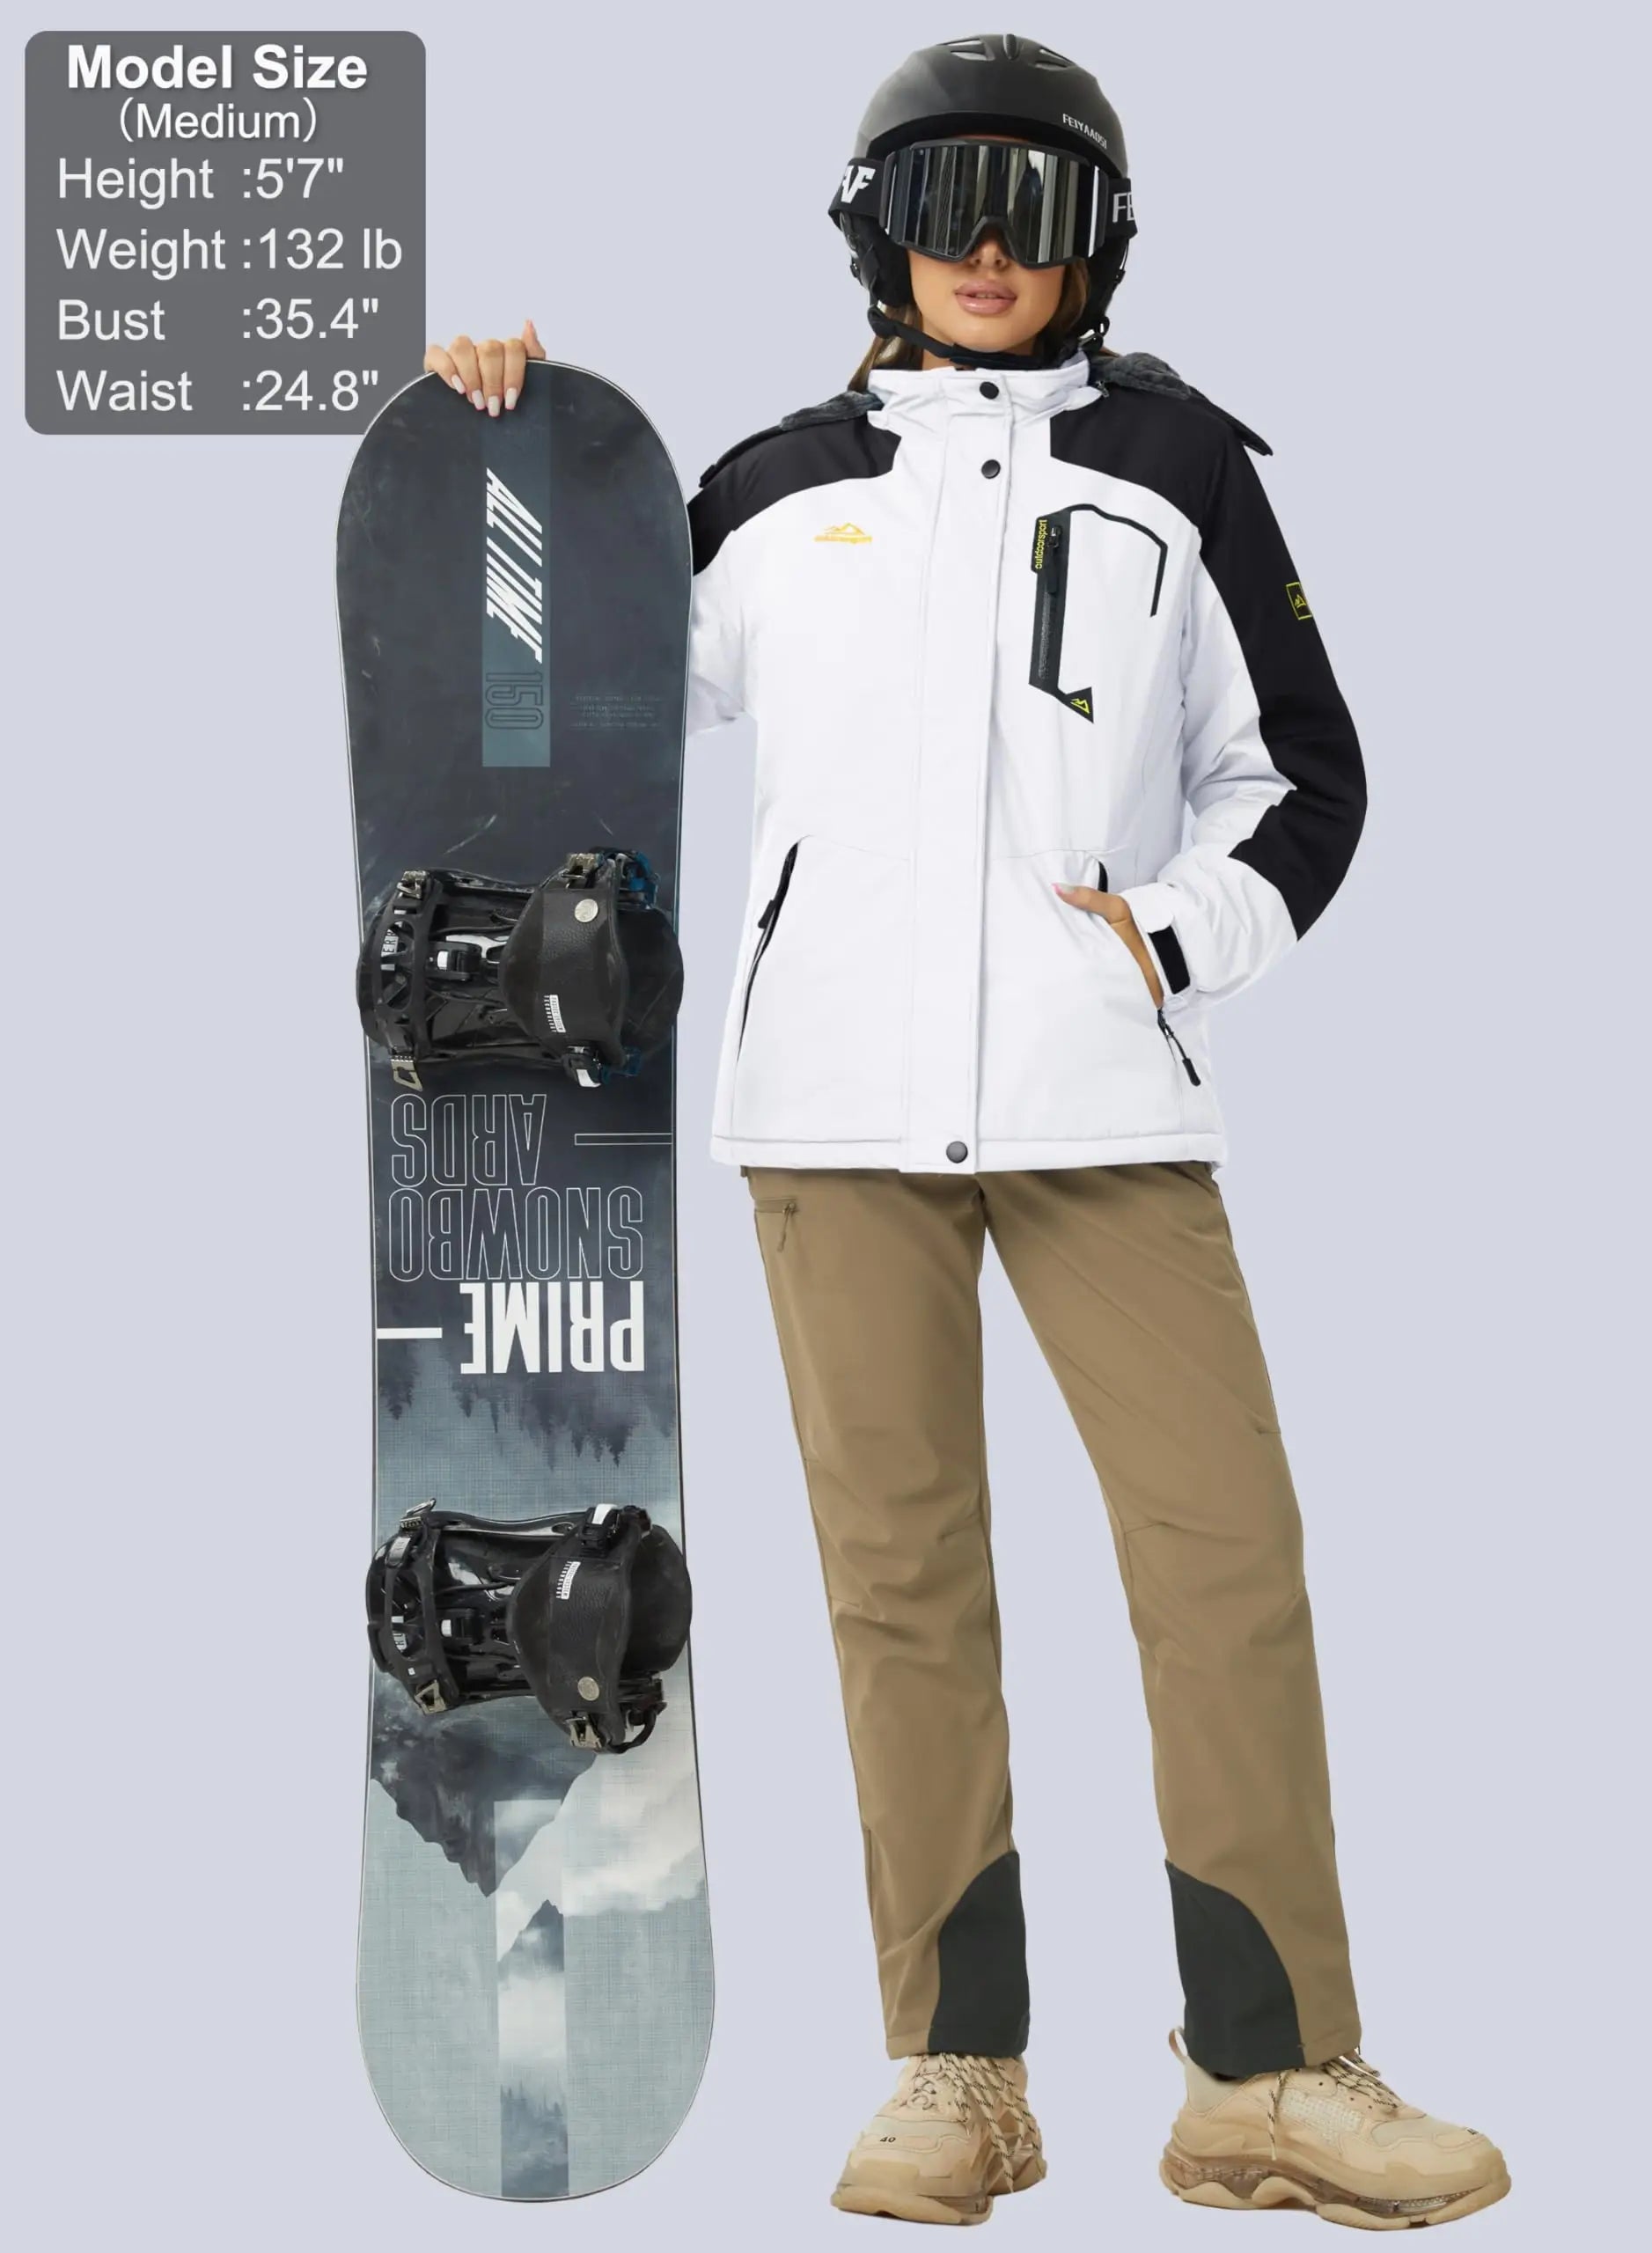 Female model wearing a black and white waterproof jacket while holing a snowboard. The model is also wearing a ski helmet, ski goggles and khaki pants. 